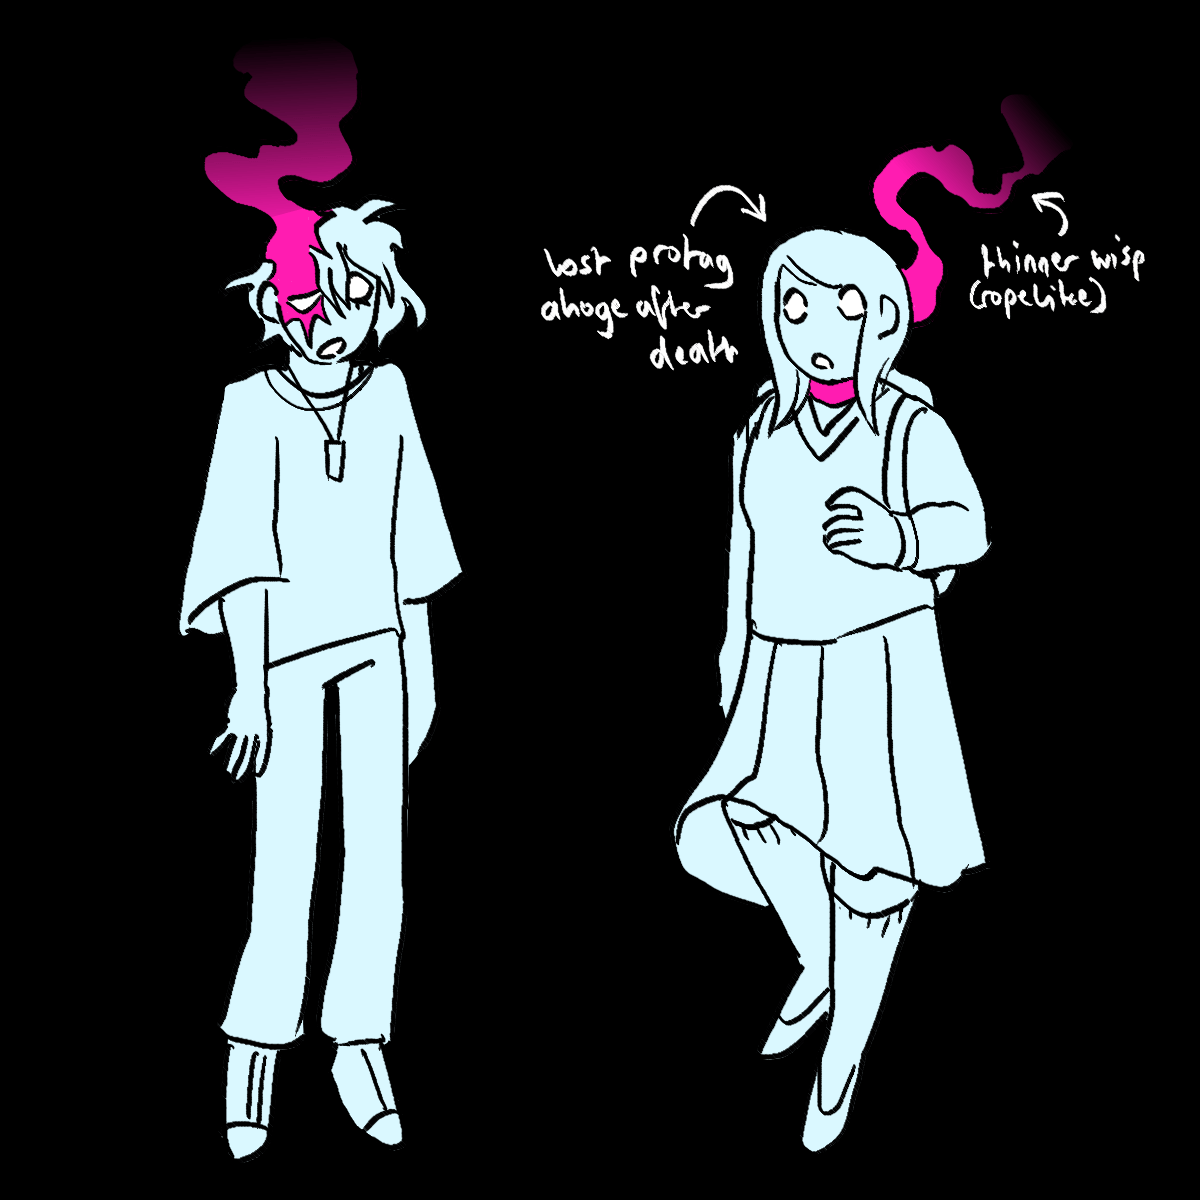 a drawing of rantaro and kaede as ghosts. they are both pale blue with magenta
		wisps representing their fatal wounds. one arrow points at kaede's head saying 'lost protag ahoge after death', and
		another points at her wisp saying 'thinner wisp (ropelike)'